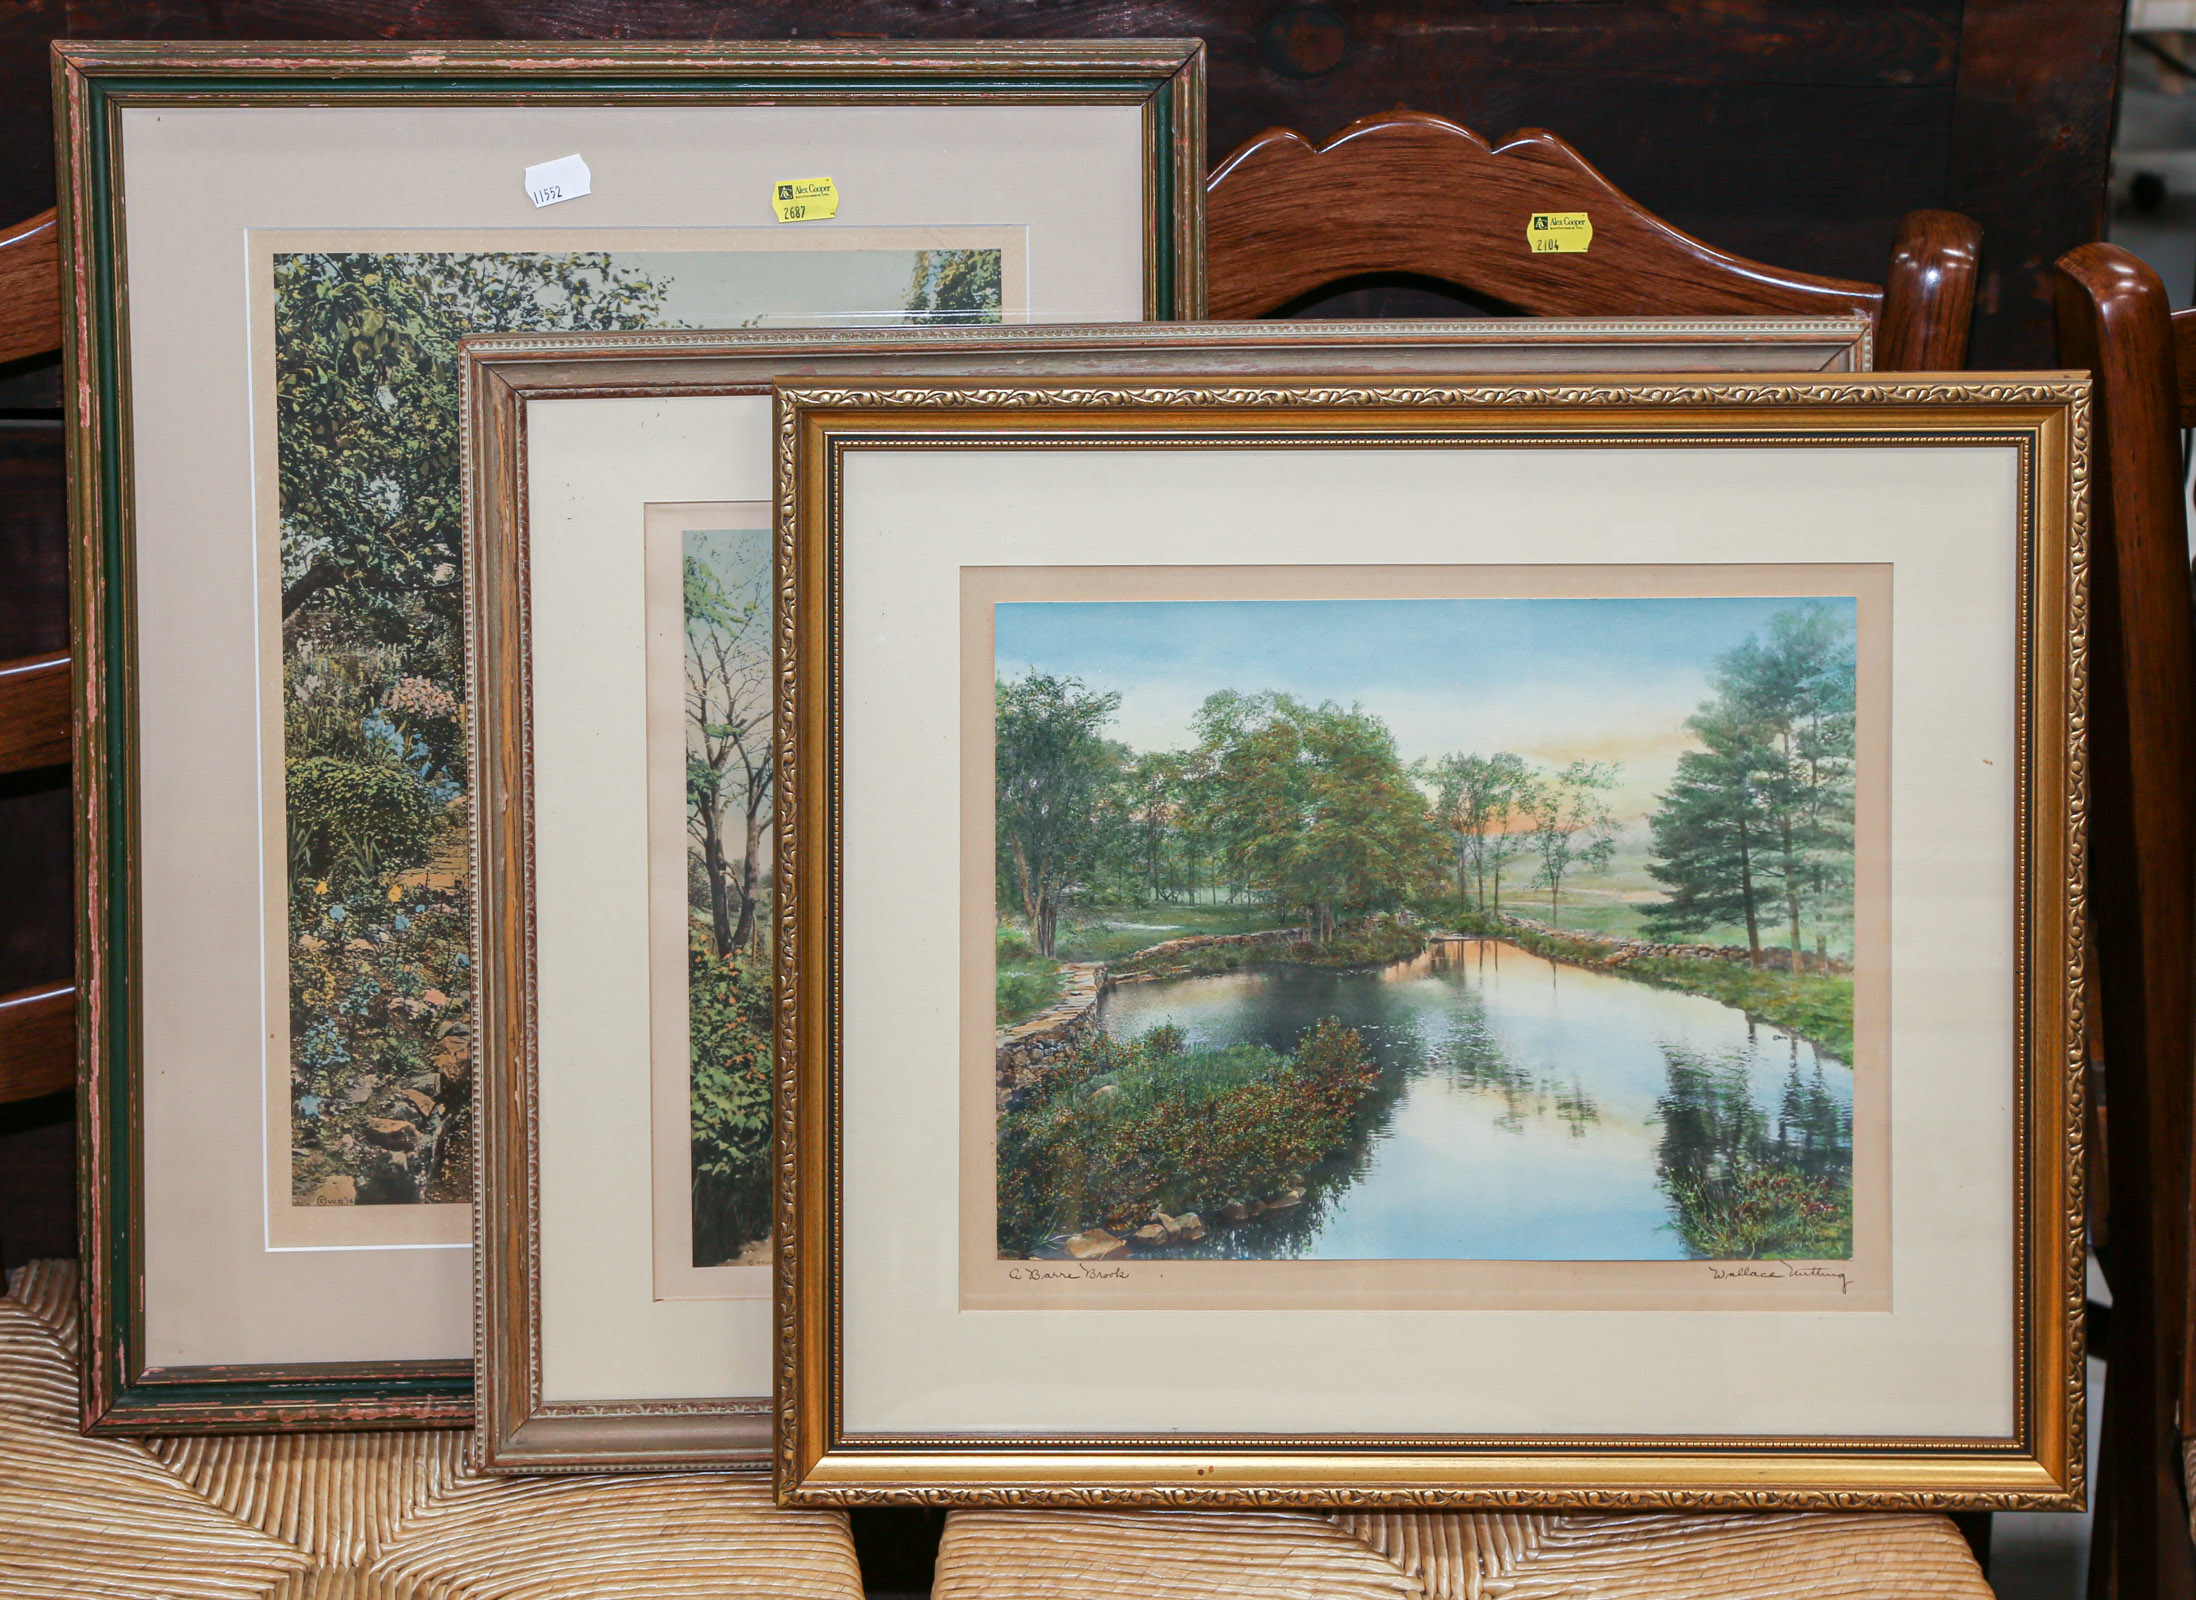 THREE FRAMED WALLACE NUTTING PHOTO